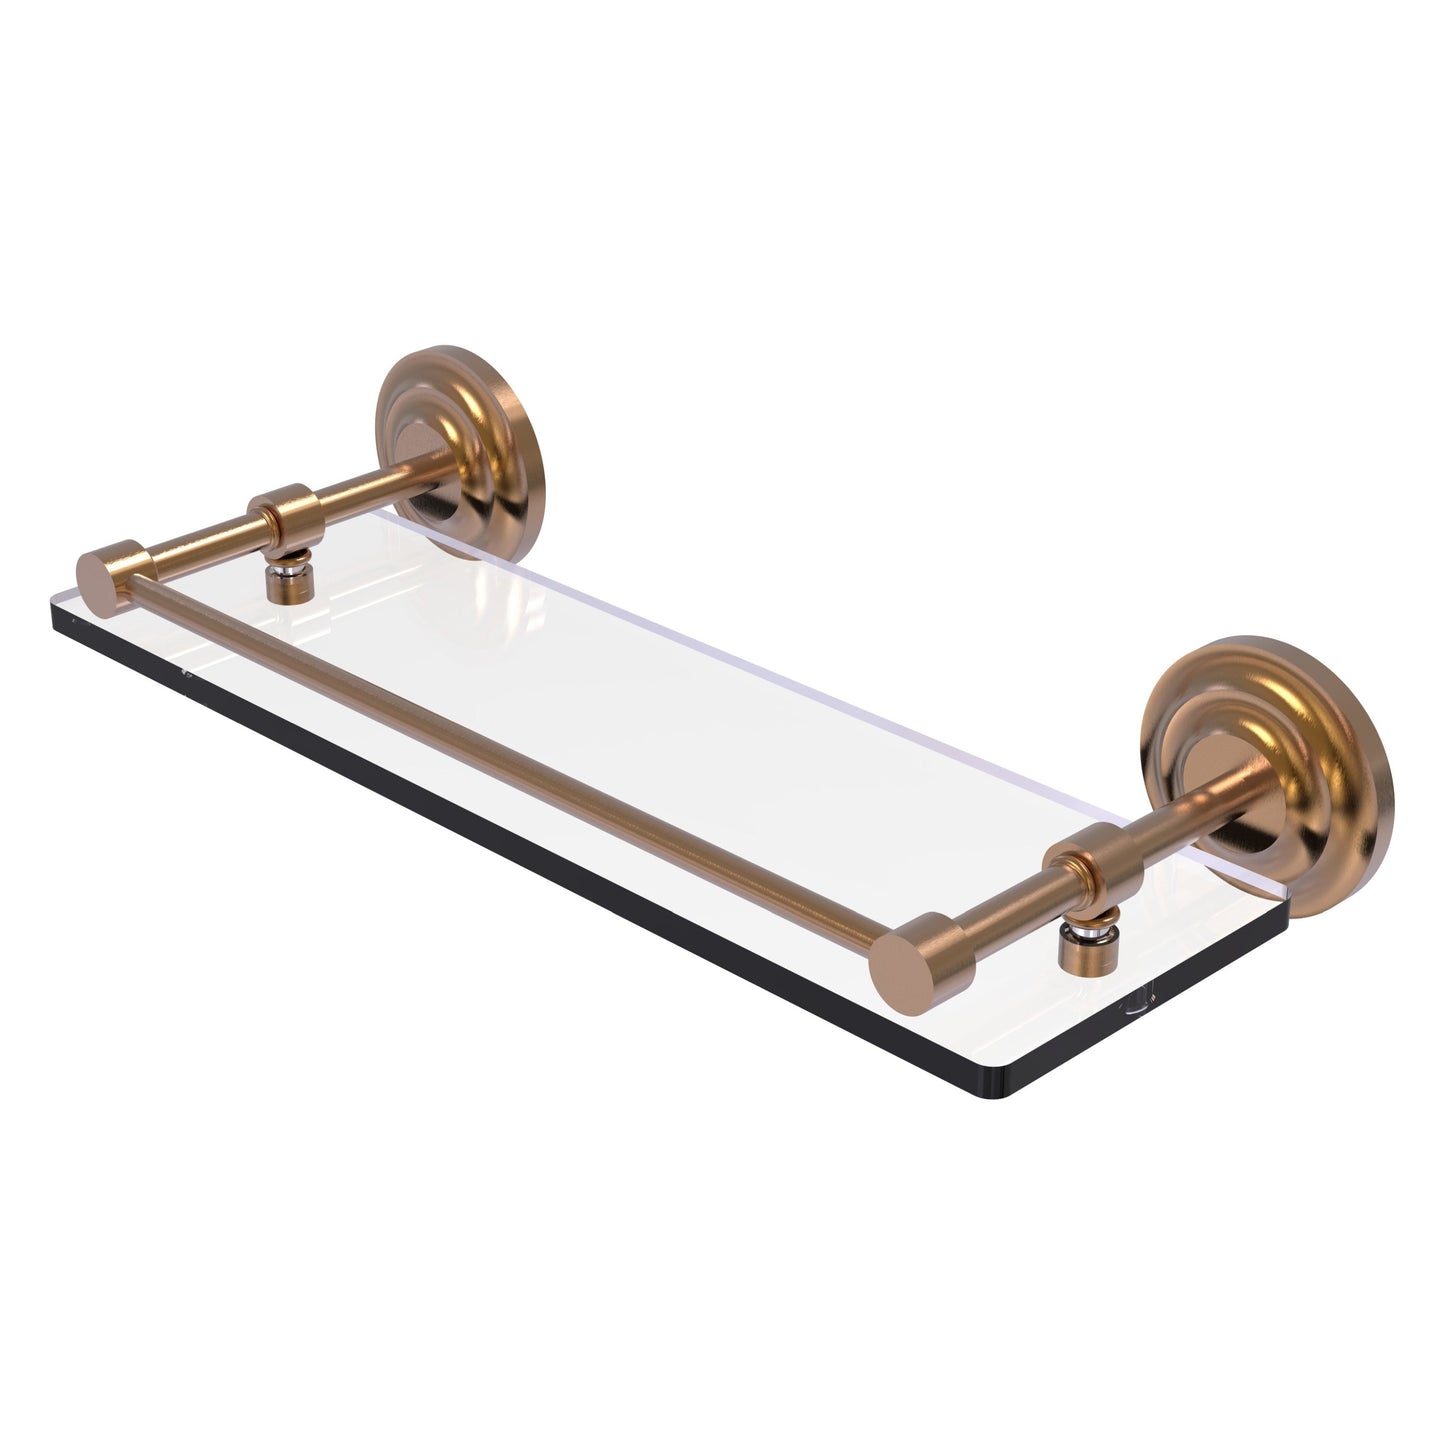 Allied Brass Que New 16" x 5" Brushed Bronze Solid Brass 16-Inch Tempered Glass Shelf With Gallery Rail